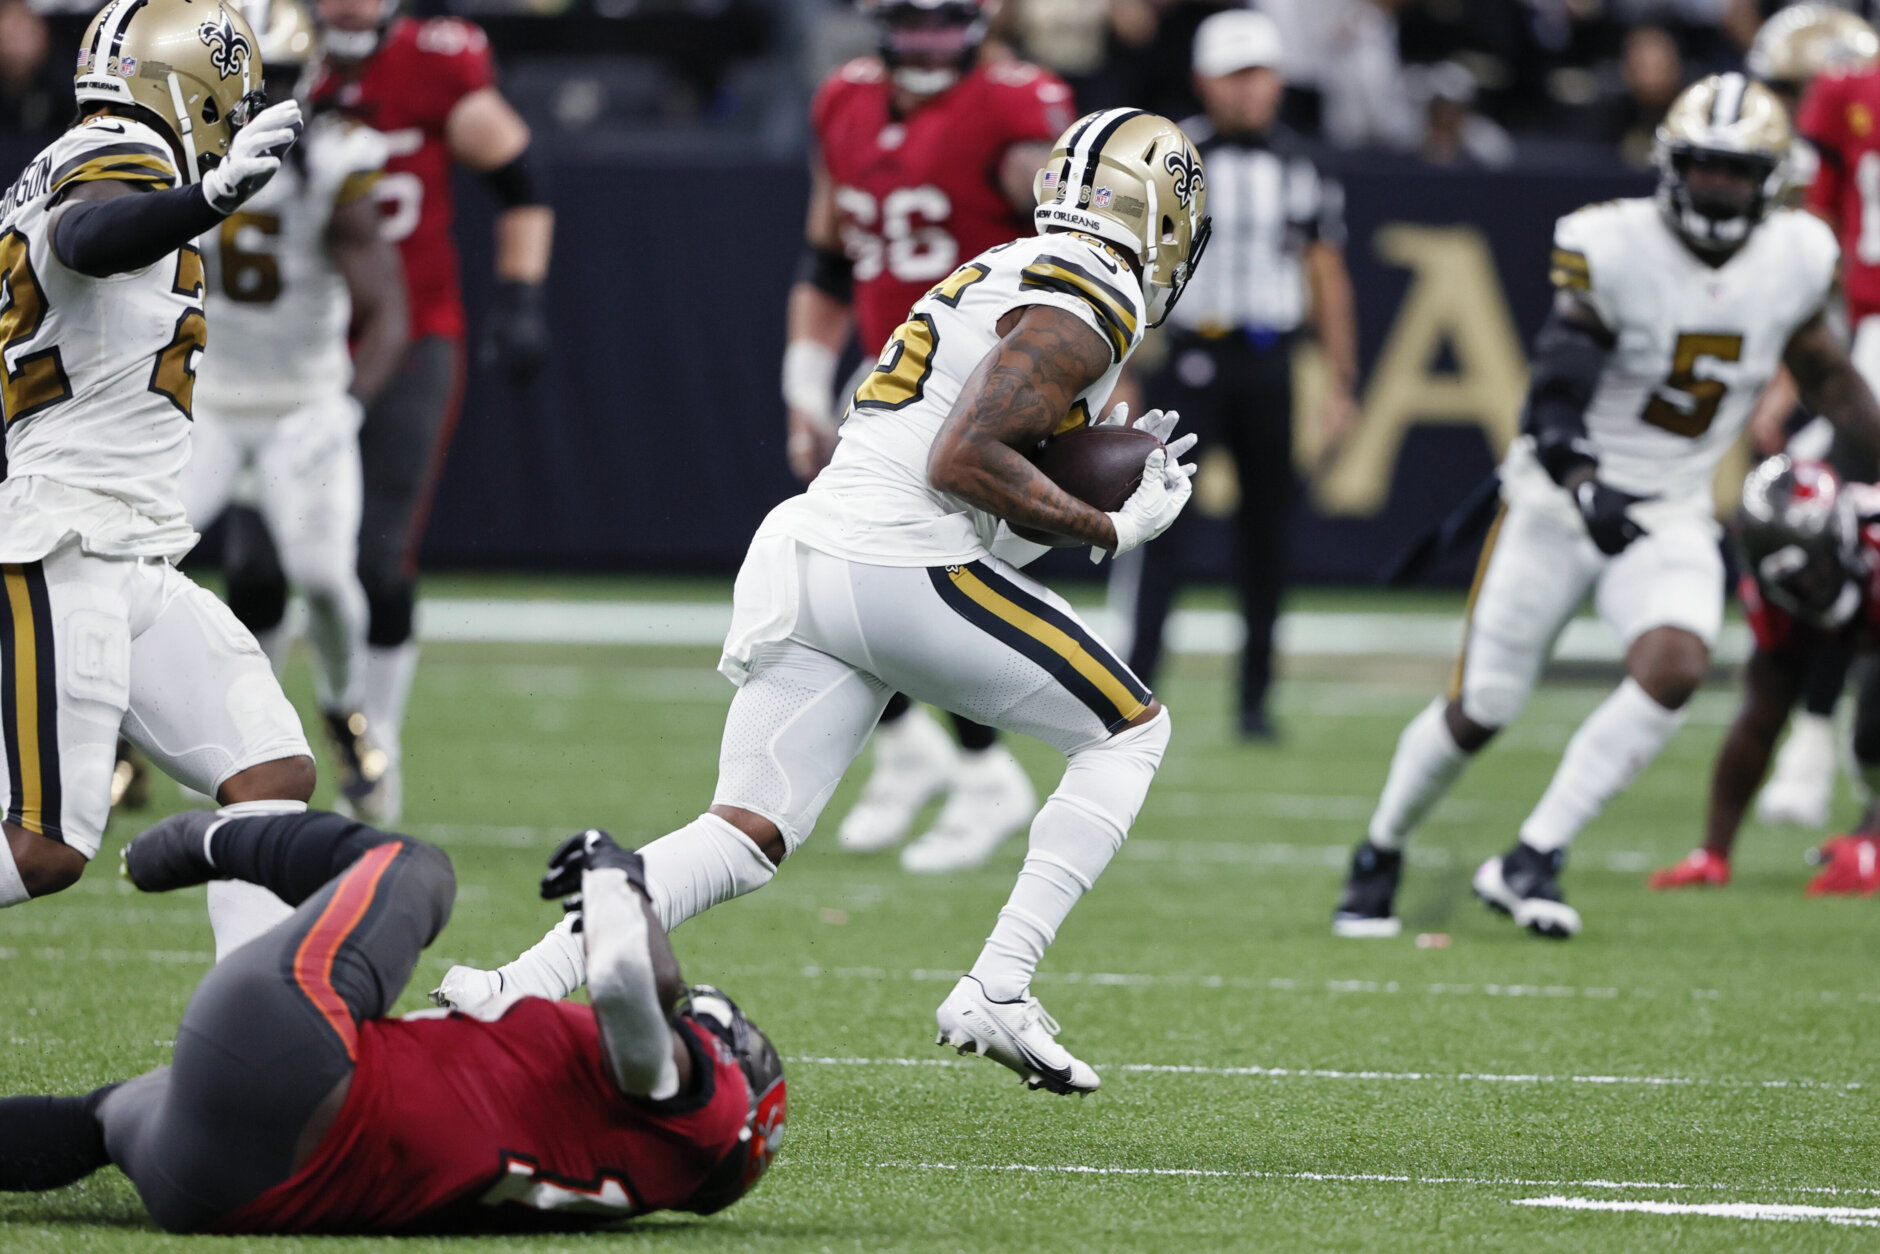 <p><em><strong>Bucs 27</strong></em><br />
<em><strong>Saints 36</strong></em></p>
<p>Here&#8217;s a Halloween pun for you Ghostbusters fans: Tom Brady has thrown three Pick 6s as a Tampa Bay Buccaneer. Two of them have come against the Saints.</p>
<p>New Orleans ain&#8217;t scared of no GOAT.</p>
<p><em>I&#8217;ll see myself out.</em></p>
<p>Unfortunately, so will Jameis Winston after a leg injury that&#8217;s feared to be season-ending. The Saints won this game but it figures to be a struggle to do so regularly enough to make this result matter to the race for the NFC South.</p>
